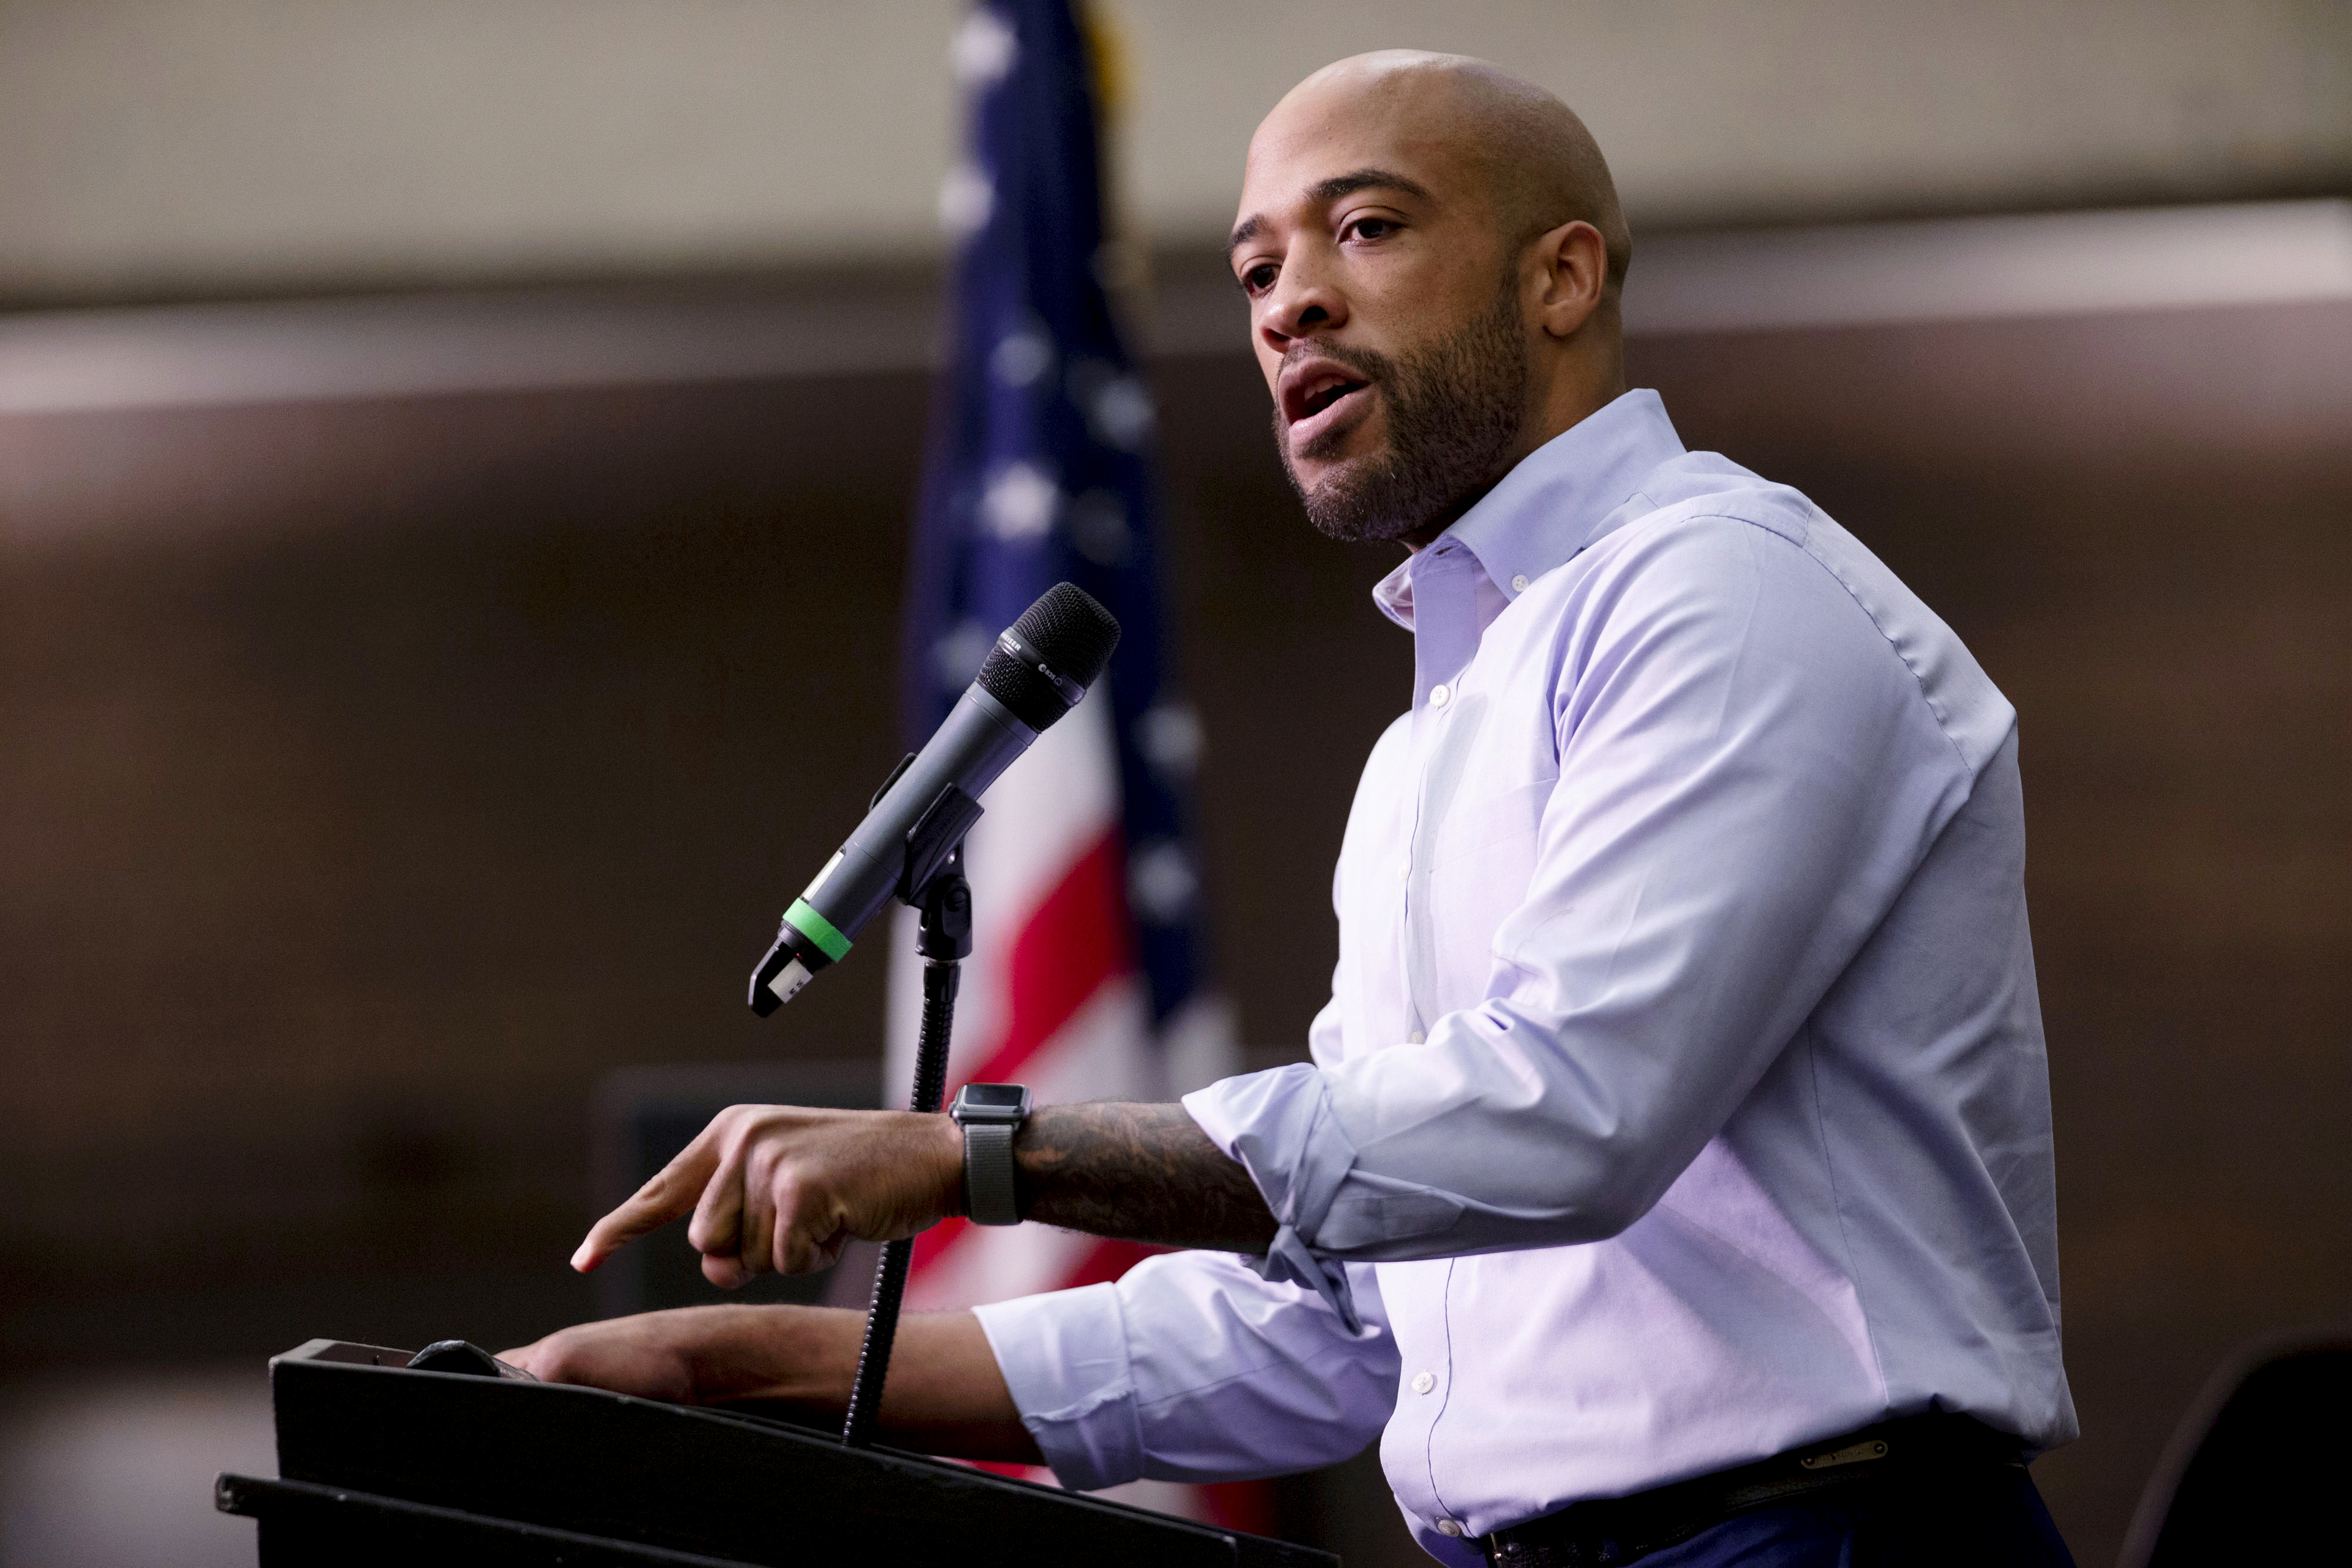 Mandela Barnes speaks during a campaign rally in Milwaukee on October 22, 2018, before taking office as Lieutenant Governor of Wisconsin.